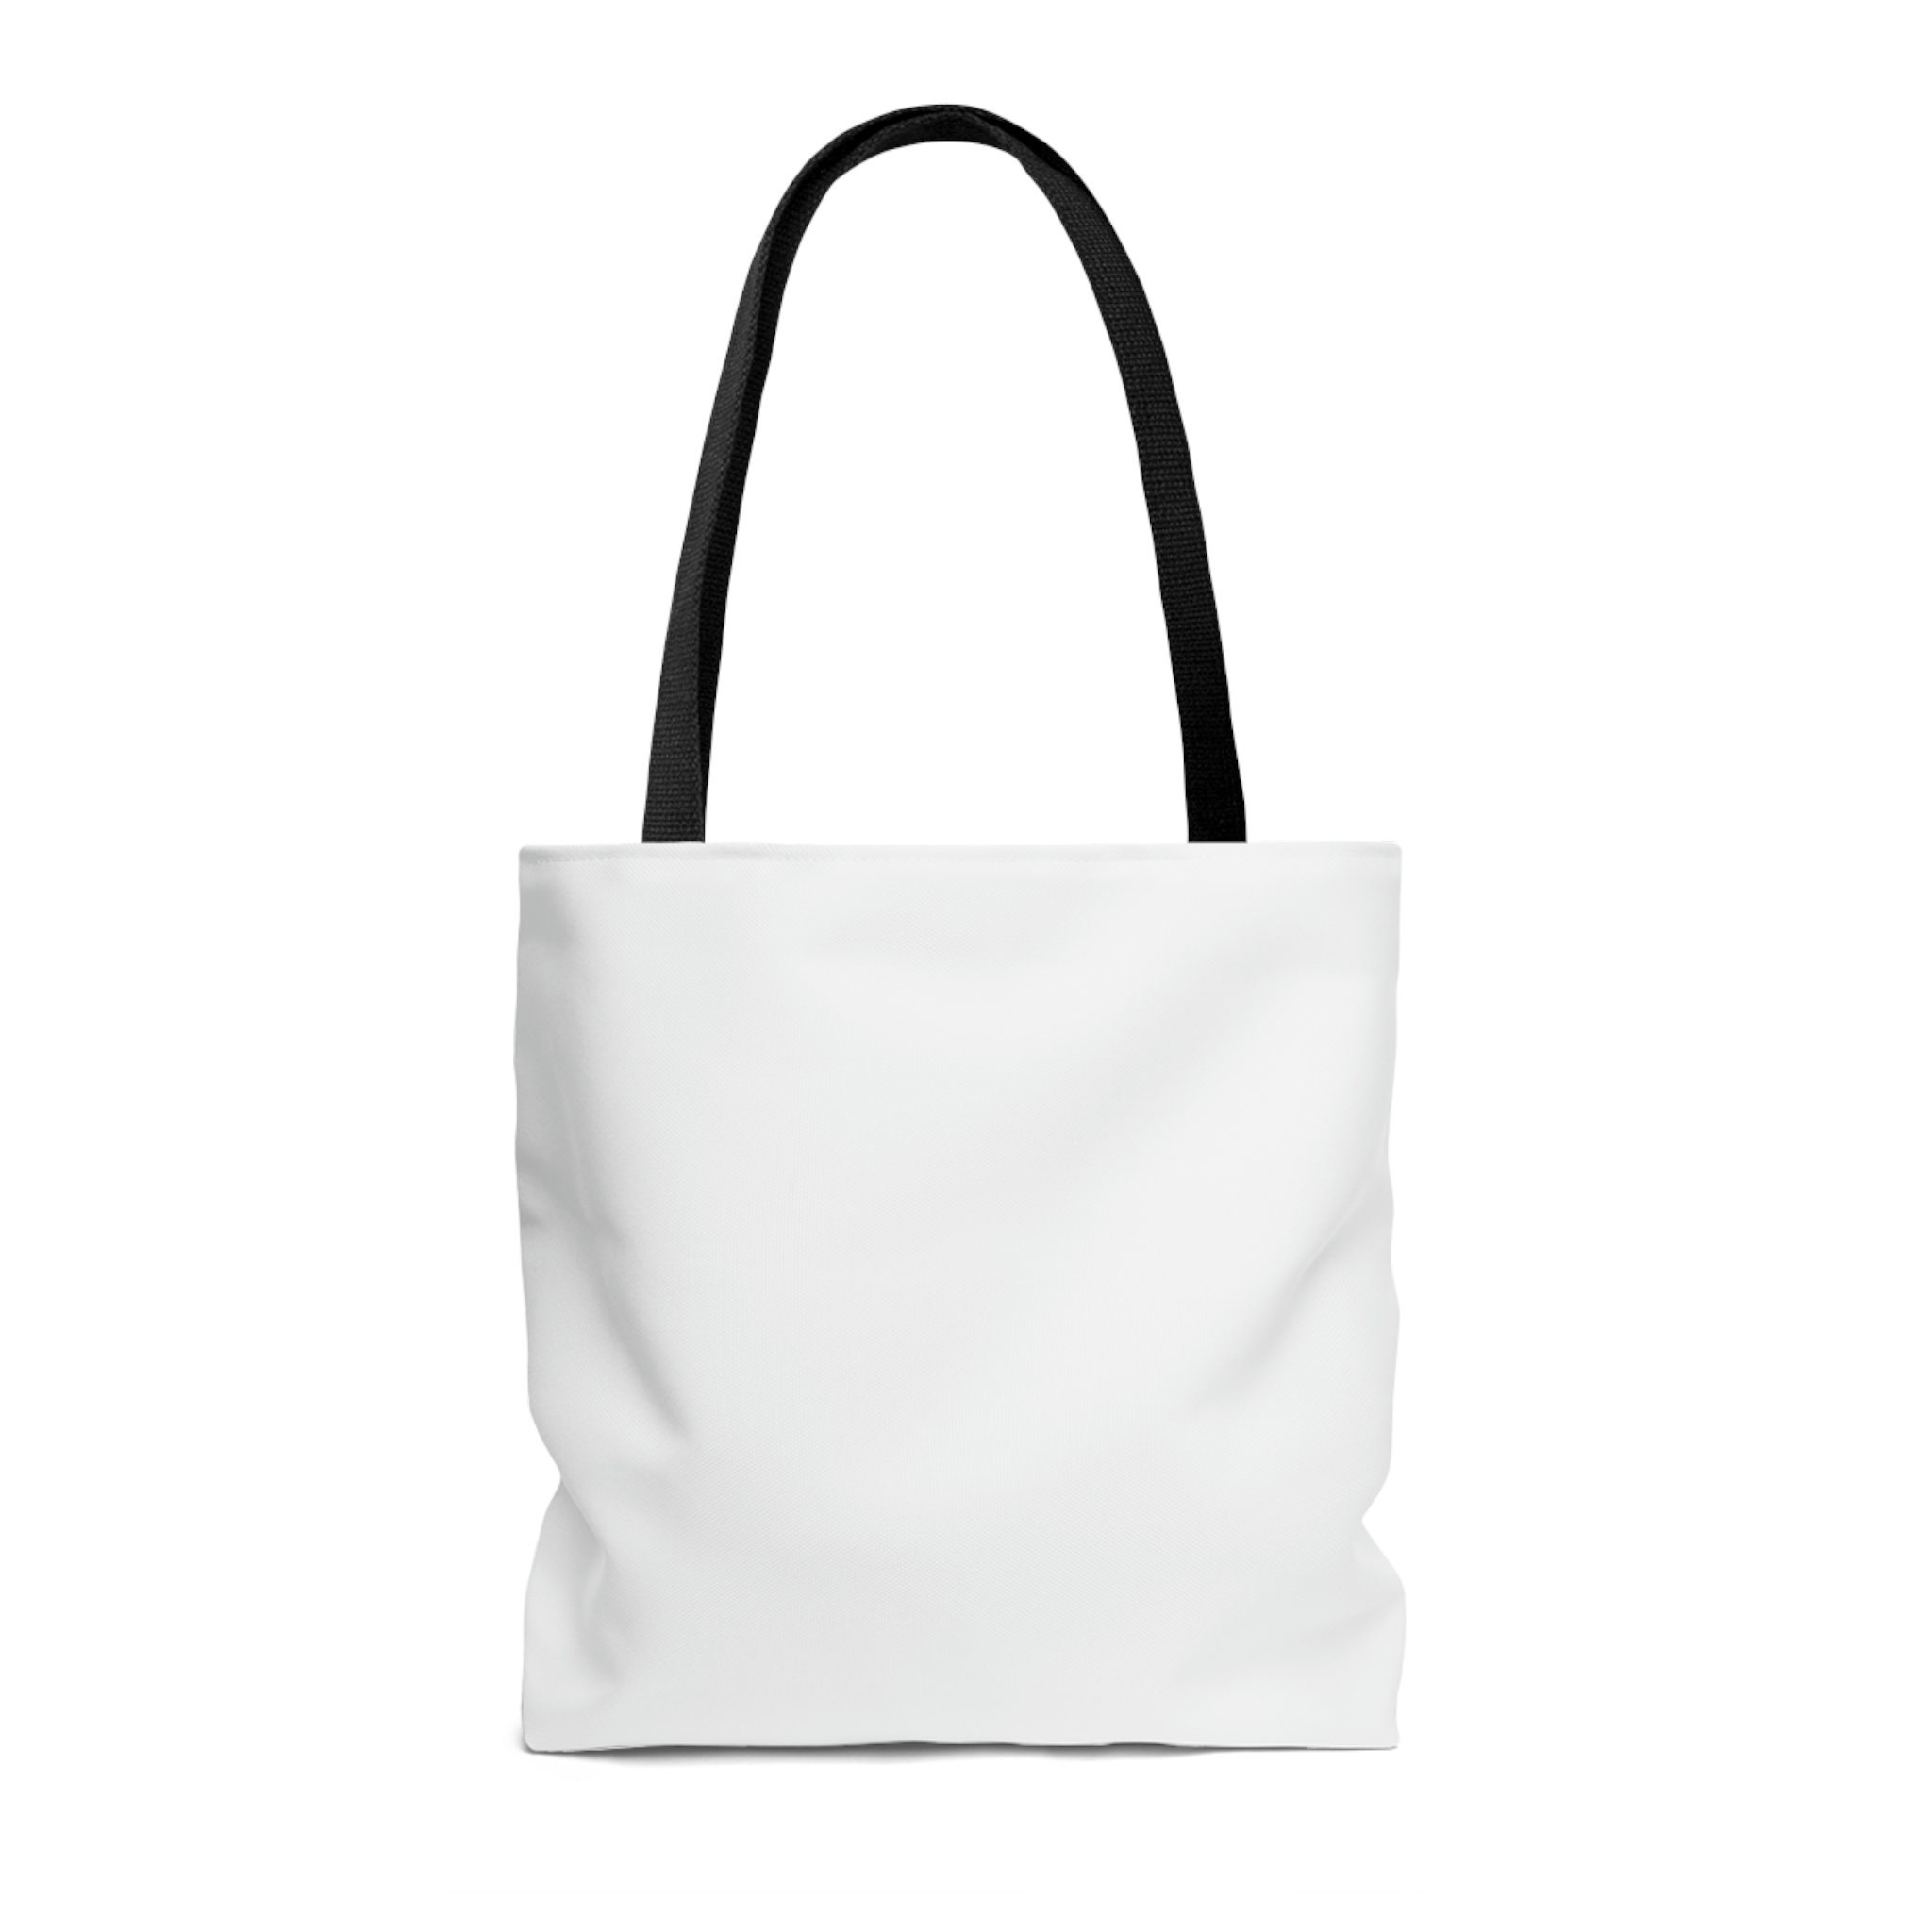 Loving all of the mini totes right now. Functional and cute #calvinkle